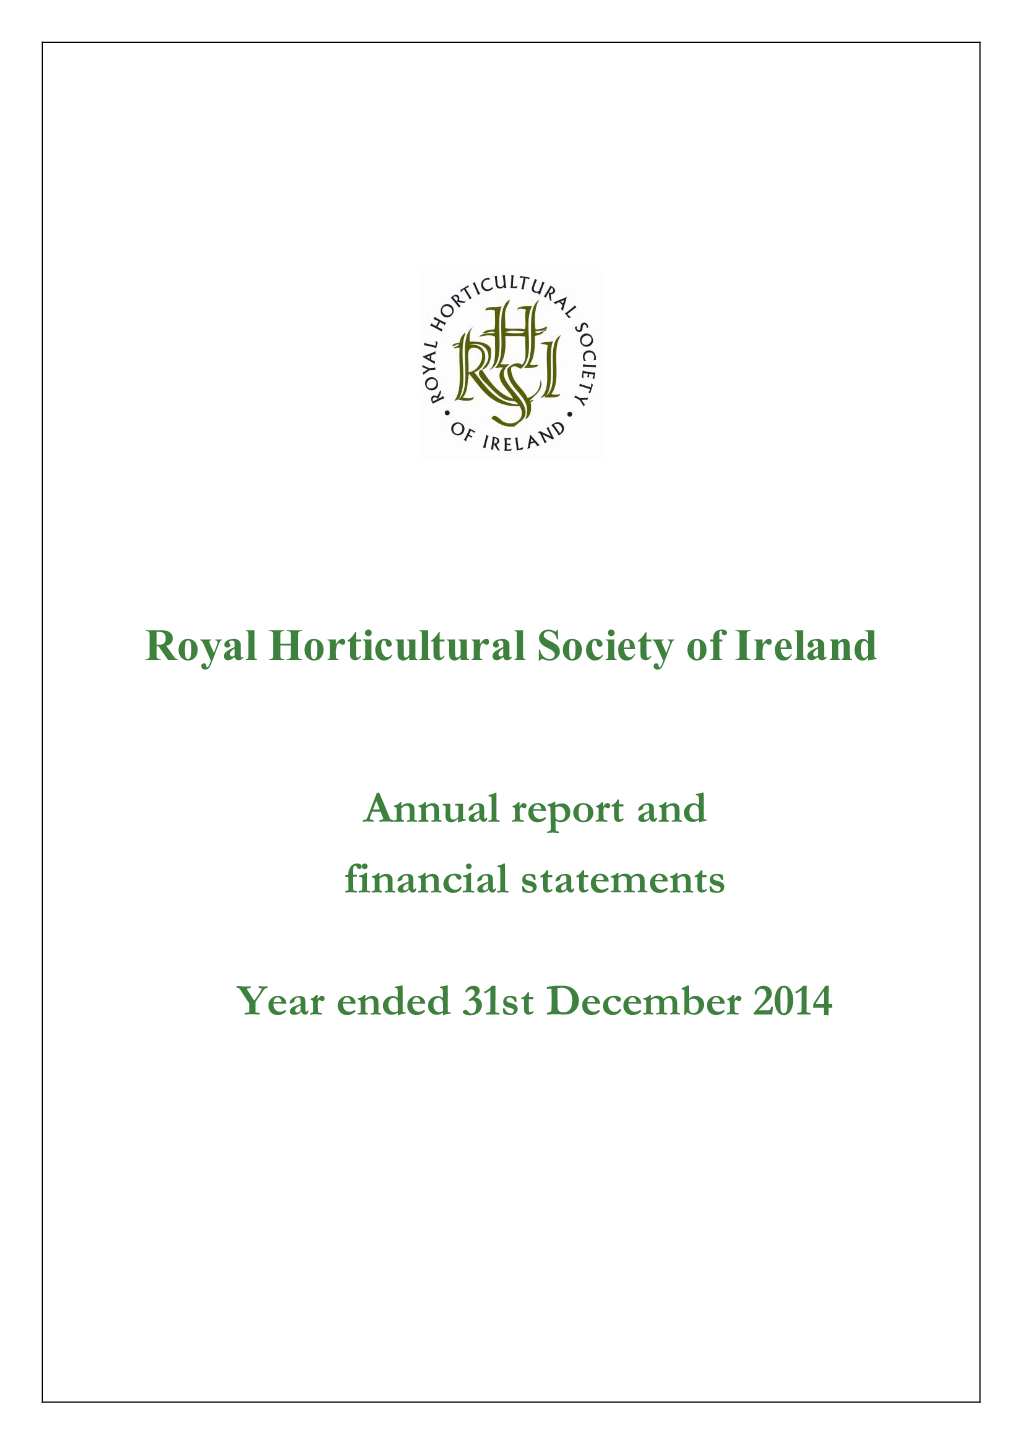 Royal Horticultural Society of Ireland Annual Report and Financial